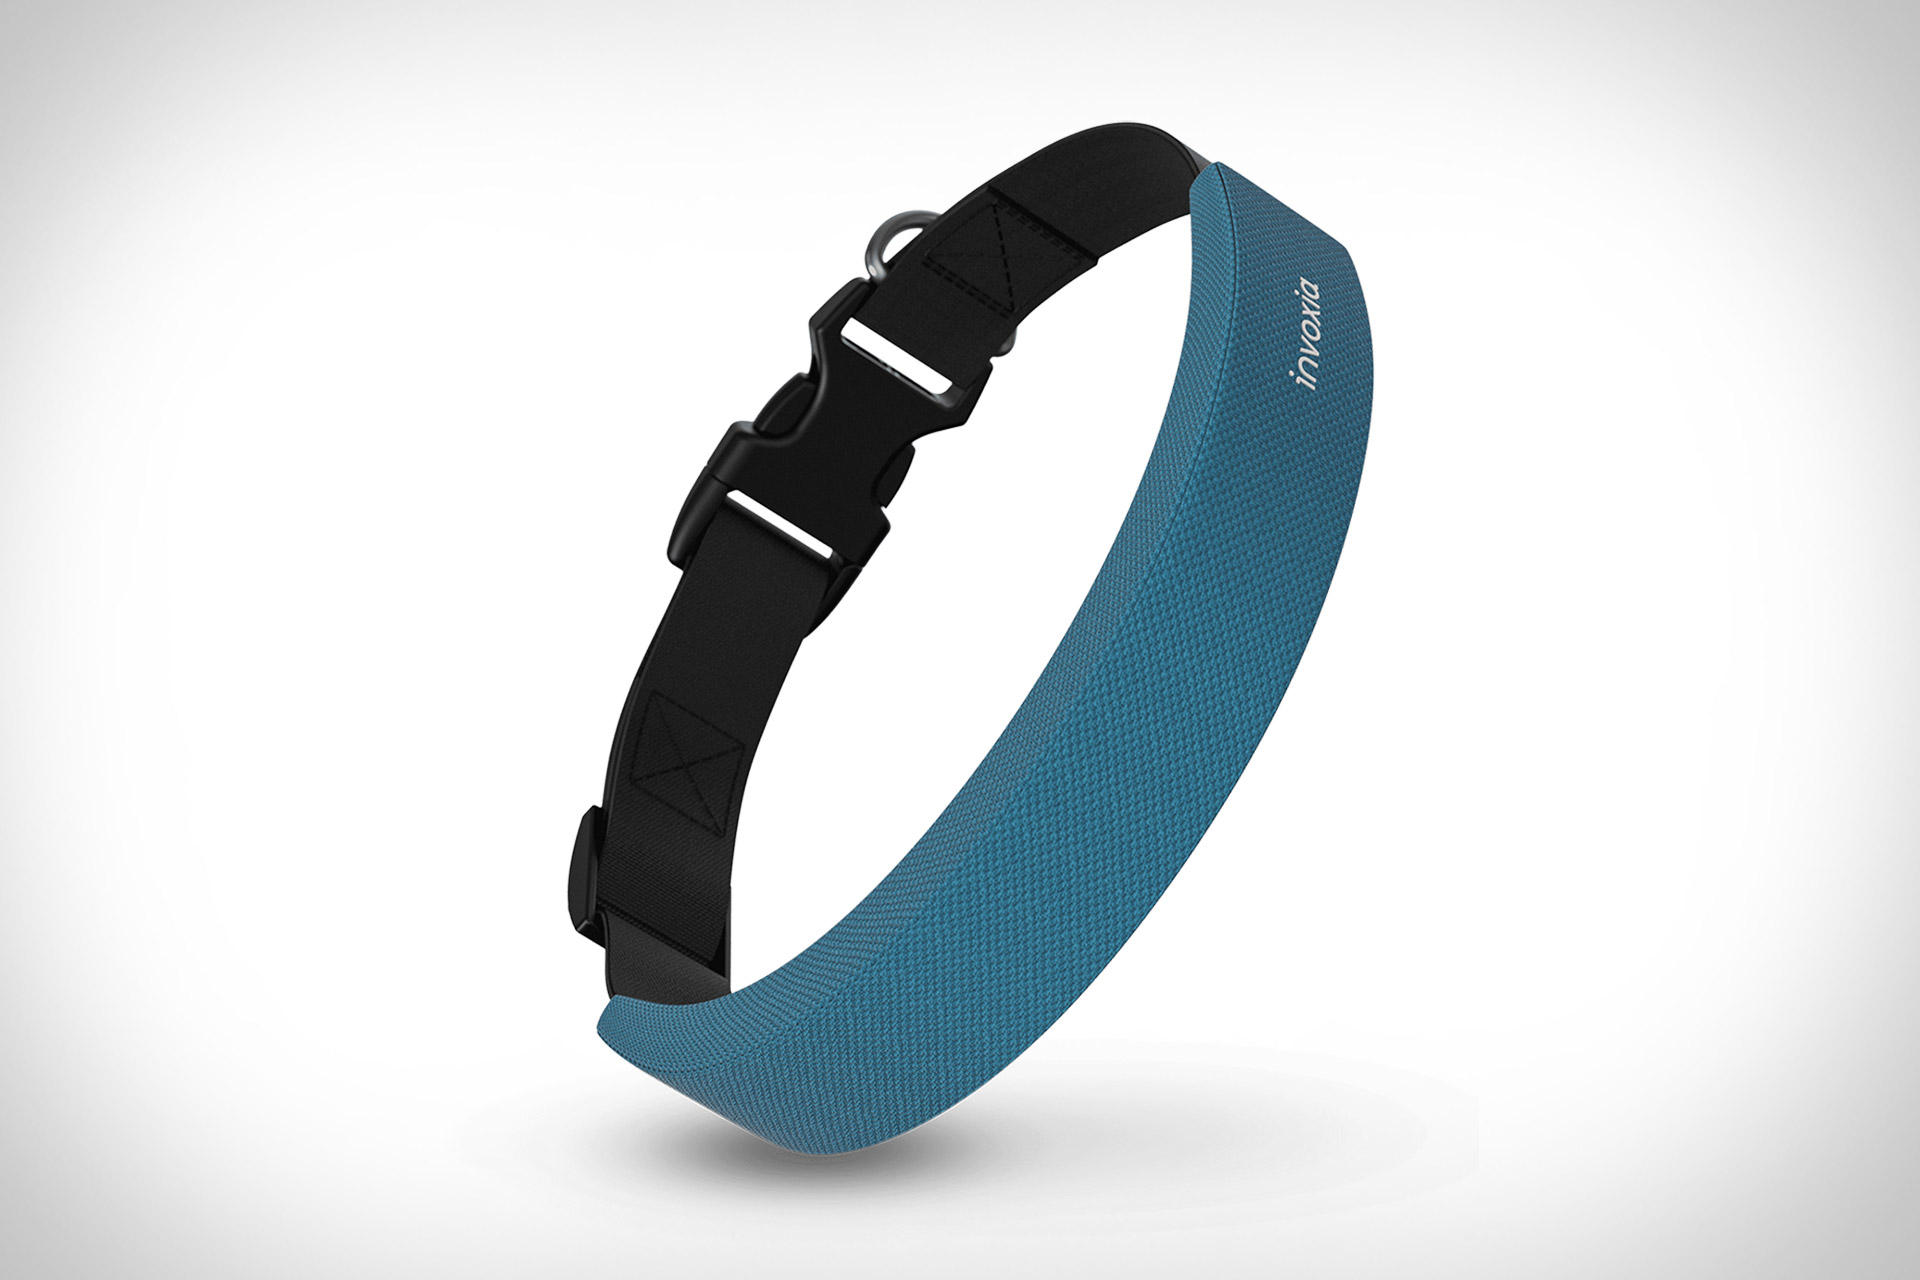 Invoxia has a new smart collar suitable for both cats and dogs